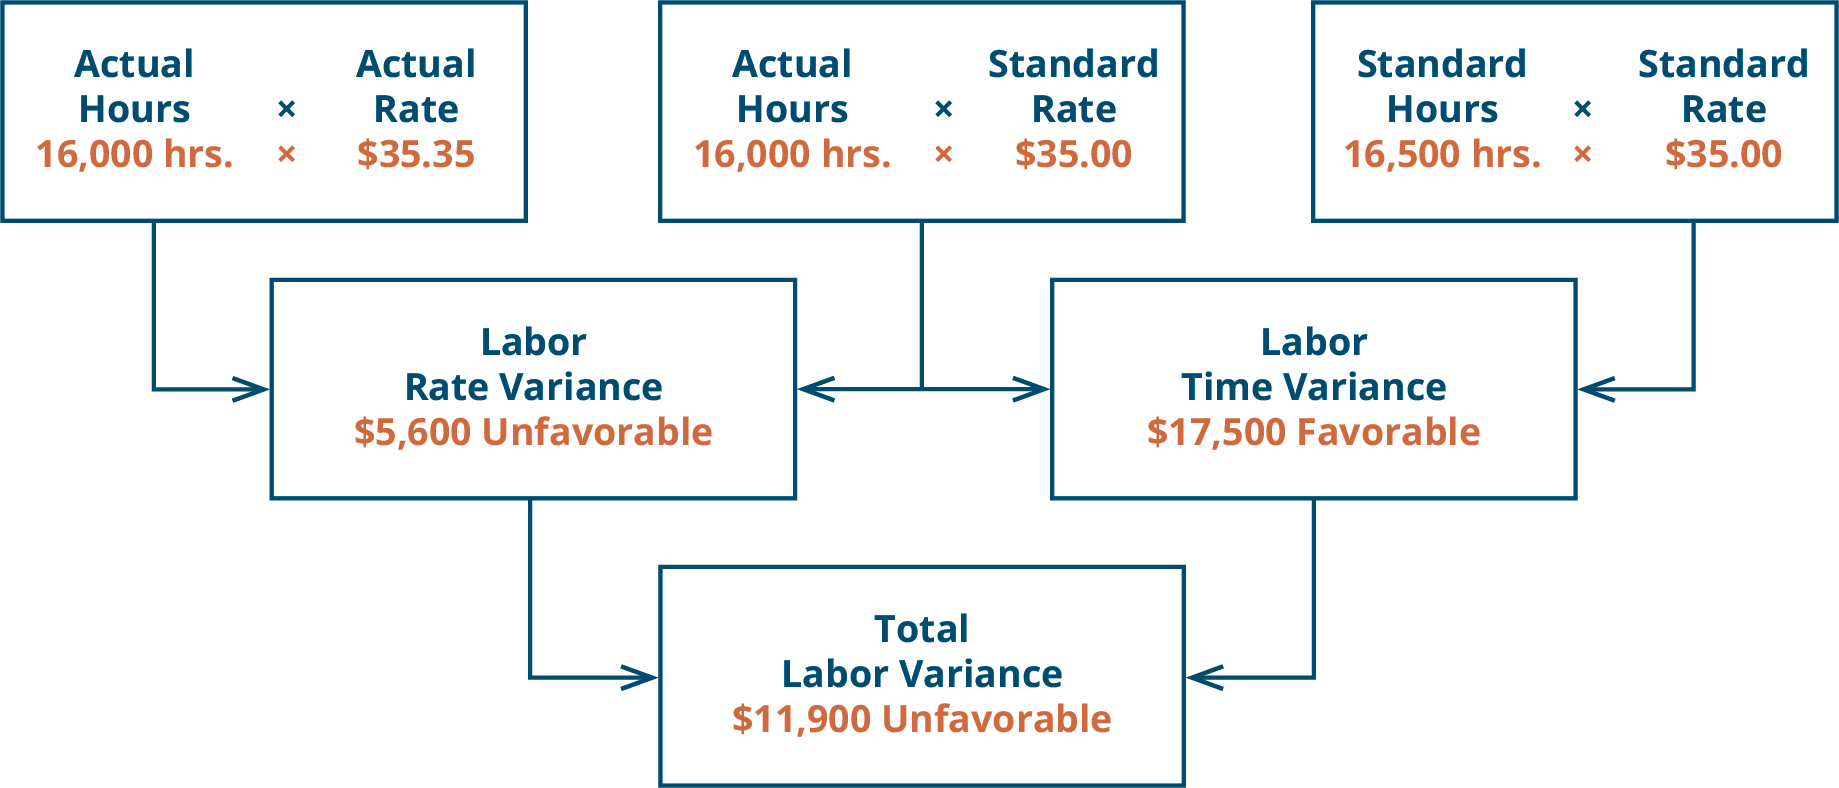 There are three top row boxes. Two, Actual Hours (16,000) times Actual Rate ($35.35) and Actual Hours (16,000) times Standard Rate ($35.00) combine to point to a Second row box: Direct Labor Rate Variance $5,600 U. Two top row boxes: Actual Hours (16,000) times Standard Rate ($35.00) and Standard Hours (16,500) times Standard Rate ($35.00) combine to point to Second row box: Direct Labor Time Variance $17,500 F. Notice the middle top row box is used for both of the variances. Second row boxes: Direct Labor Rate Variance $5,650 U and Direct Labor Time Variance $17,500 F combine to point to bottom row box: Total Direct Labor Variance $11,900 U.